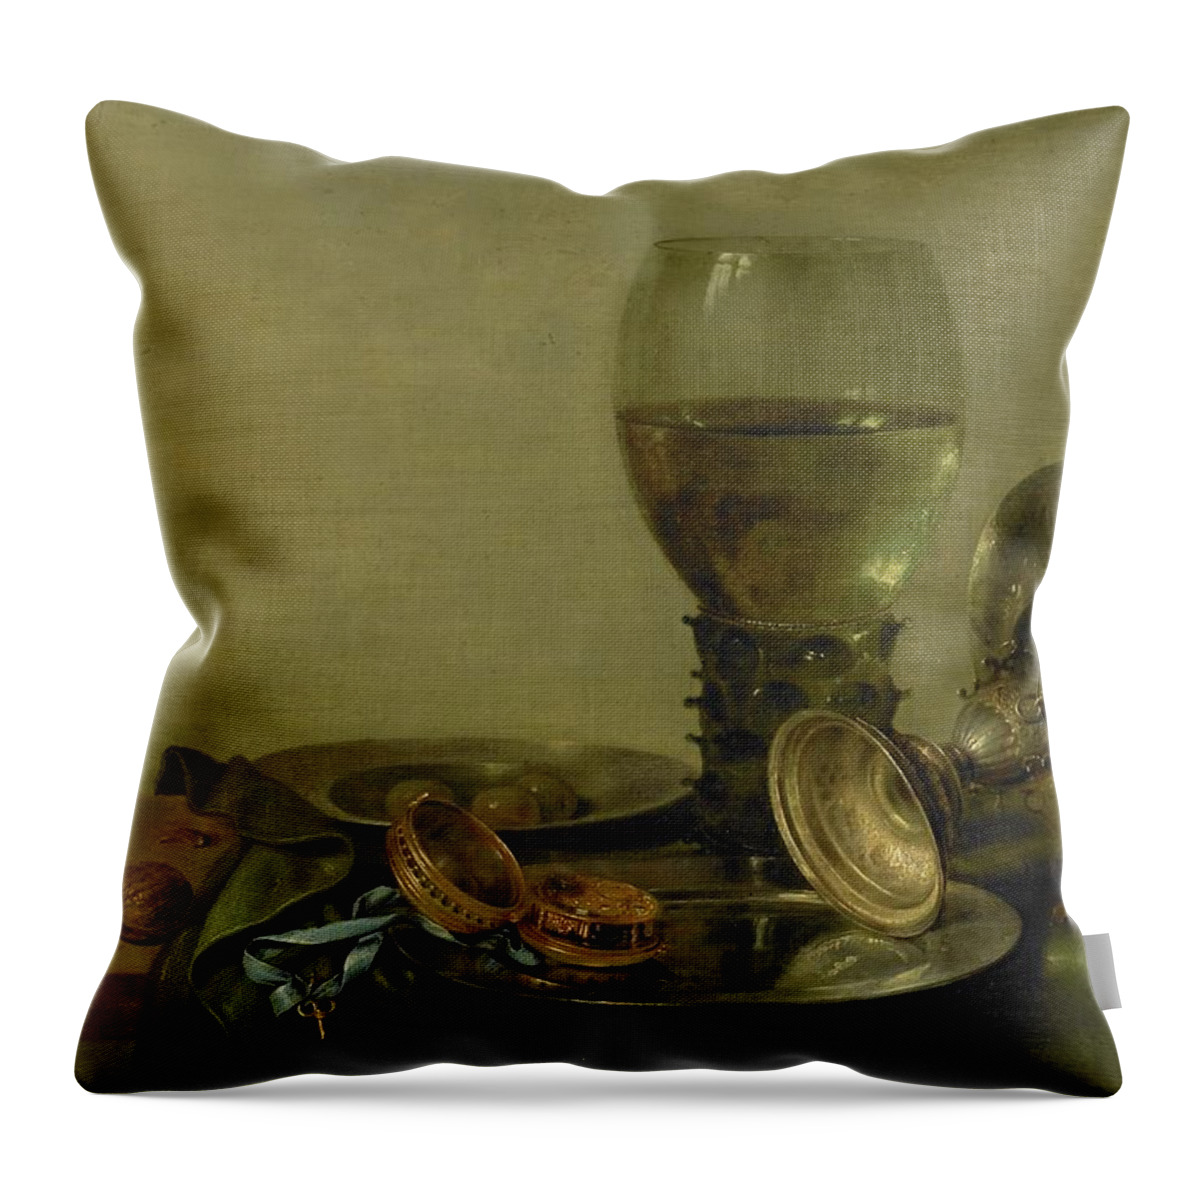 Still Life Throw Pillow featuring the painting Still Life With Roemer And Silver Tazza by Willem Claesz Heda